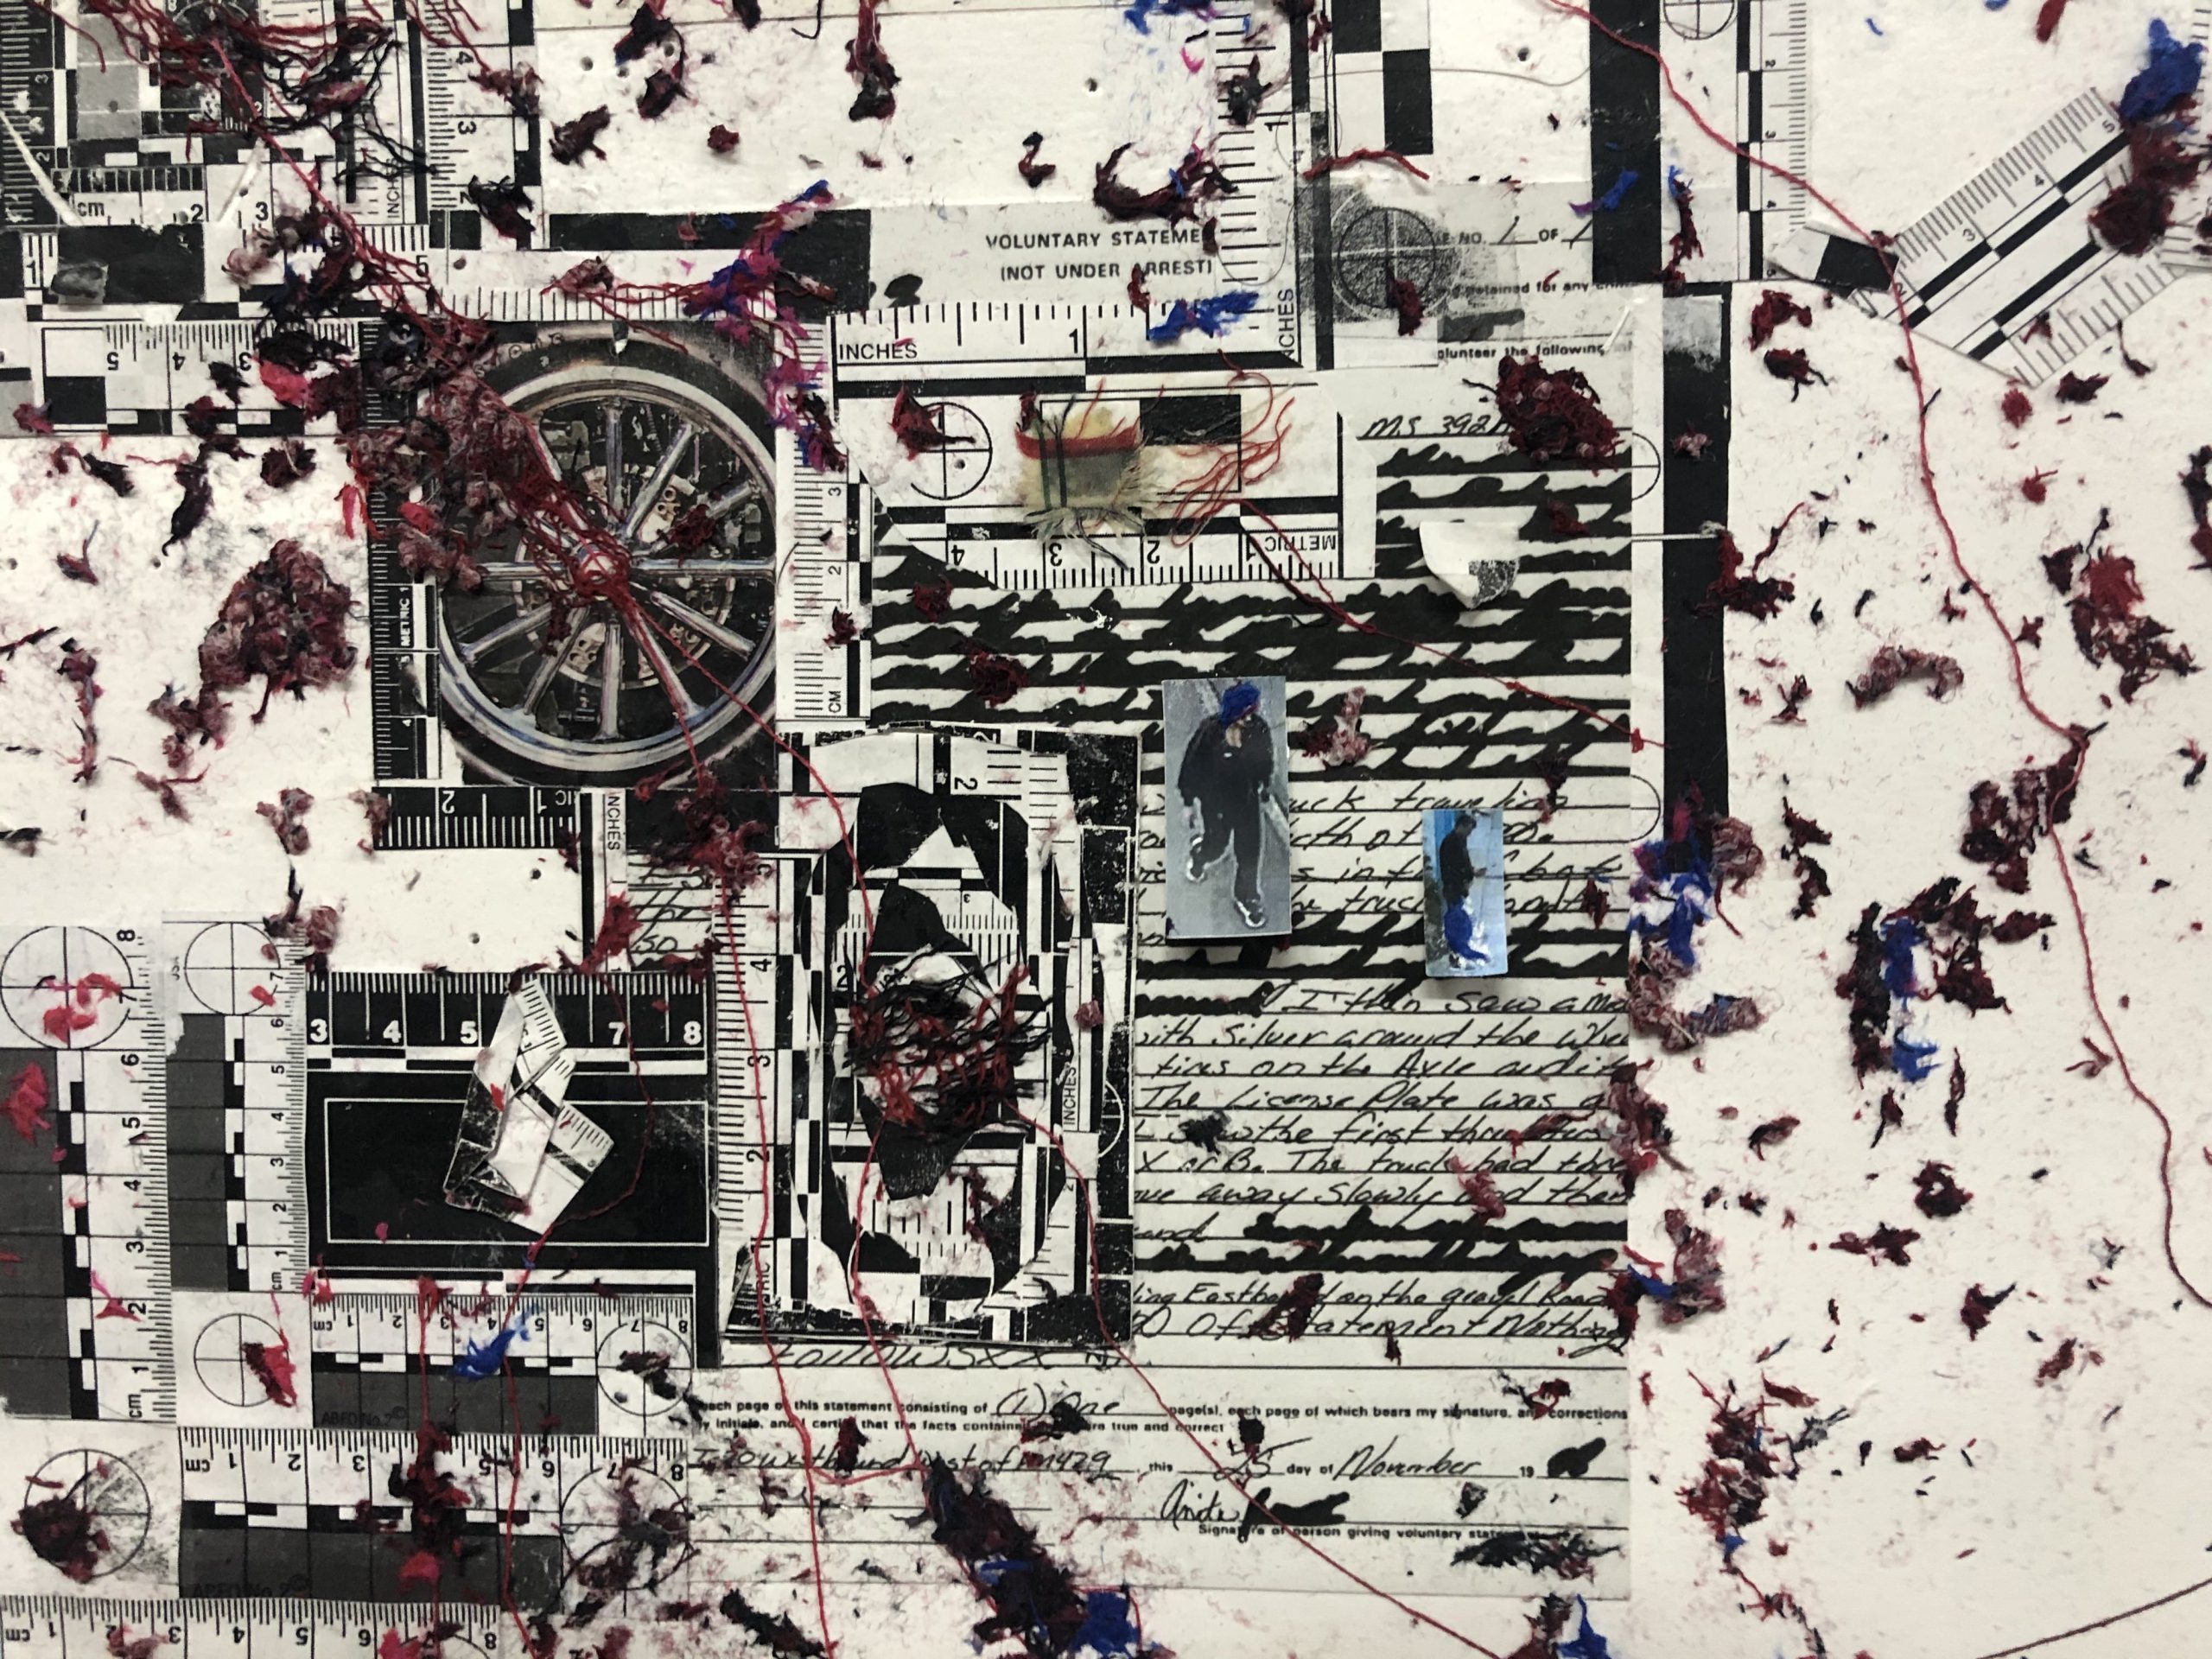 A close up of a collage with a busy composition. The background is white with a lot of material layered on top. The materials include a handwritten report in black ink, several forensic rulers in the metric system, tiny printed surveillance video stills, of a people walking, and separated red and blue fabric.